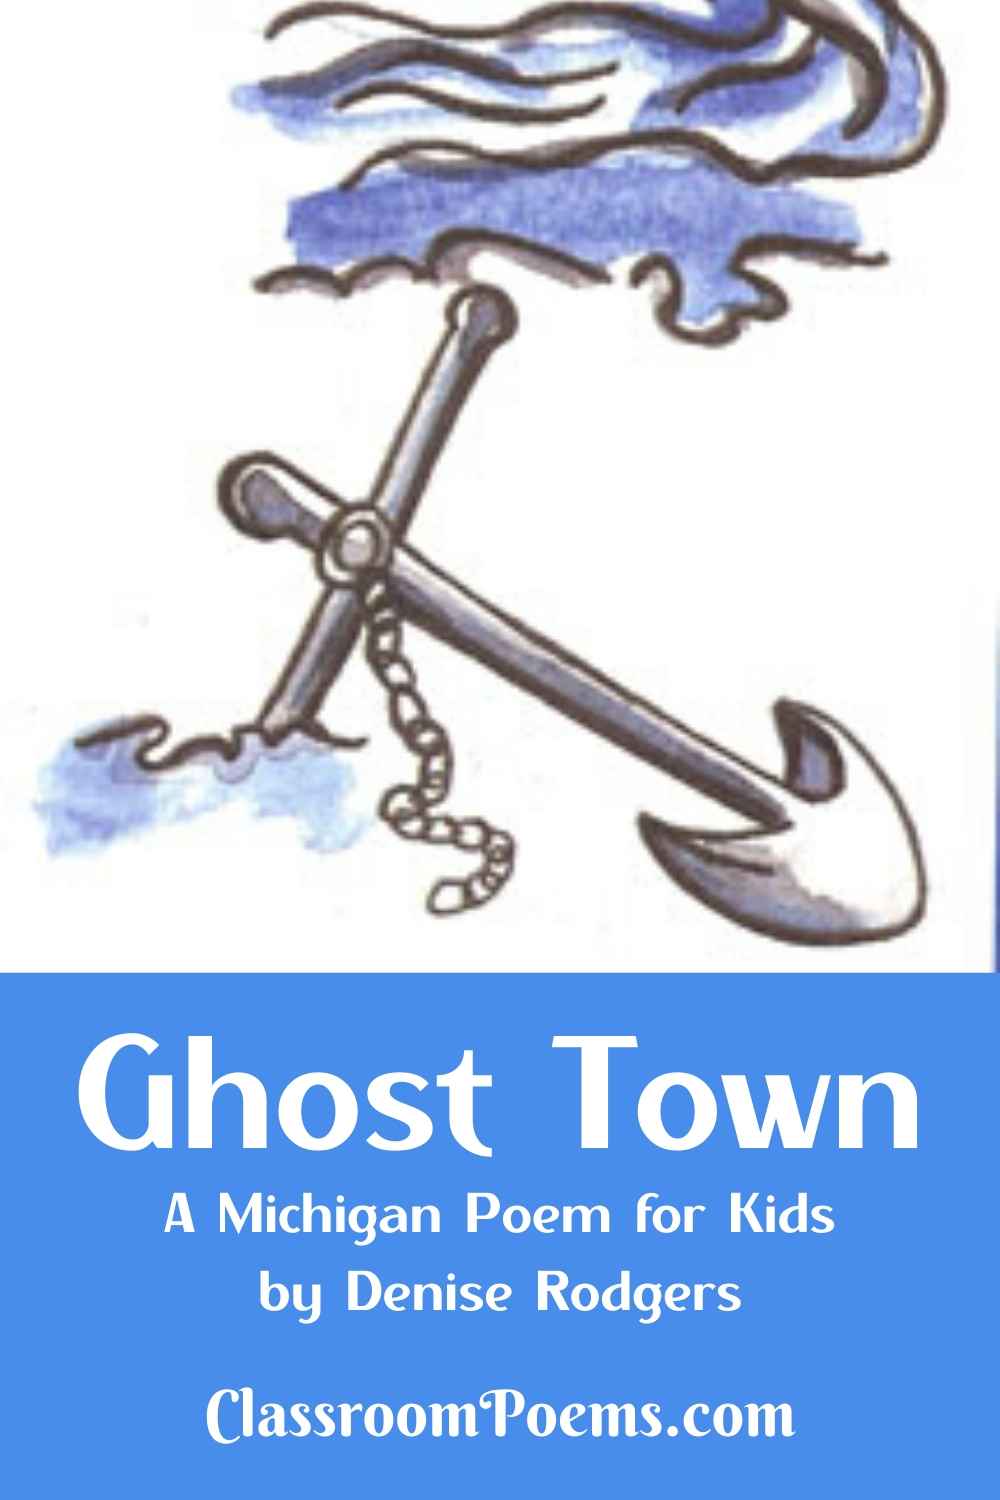 GHOST TOWN, a Michigan poem by Denise Rodgers on ClassroomPoems.com.